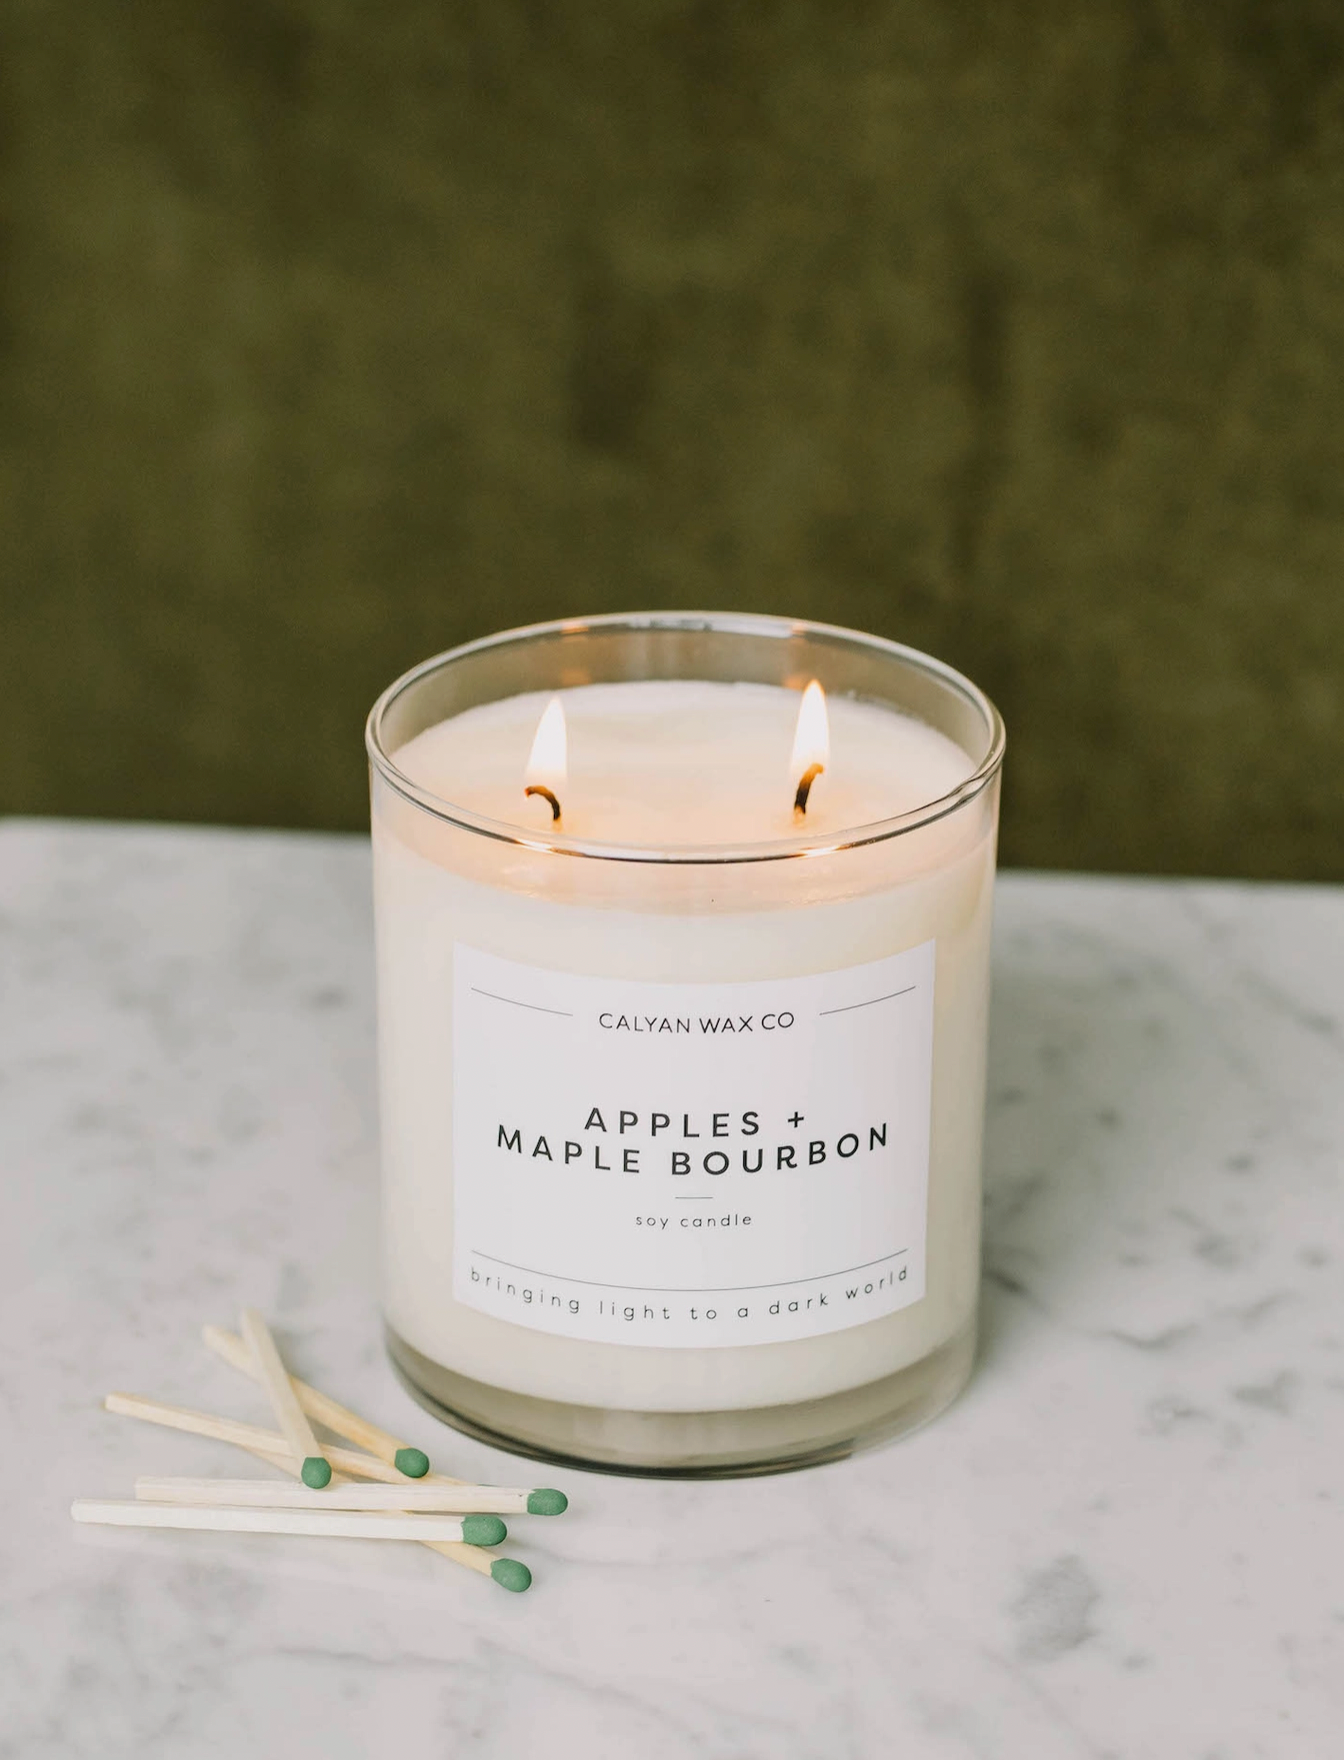 Apples + Maple Bourbon Glass Tumbler Soy Candle